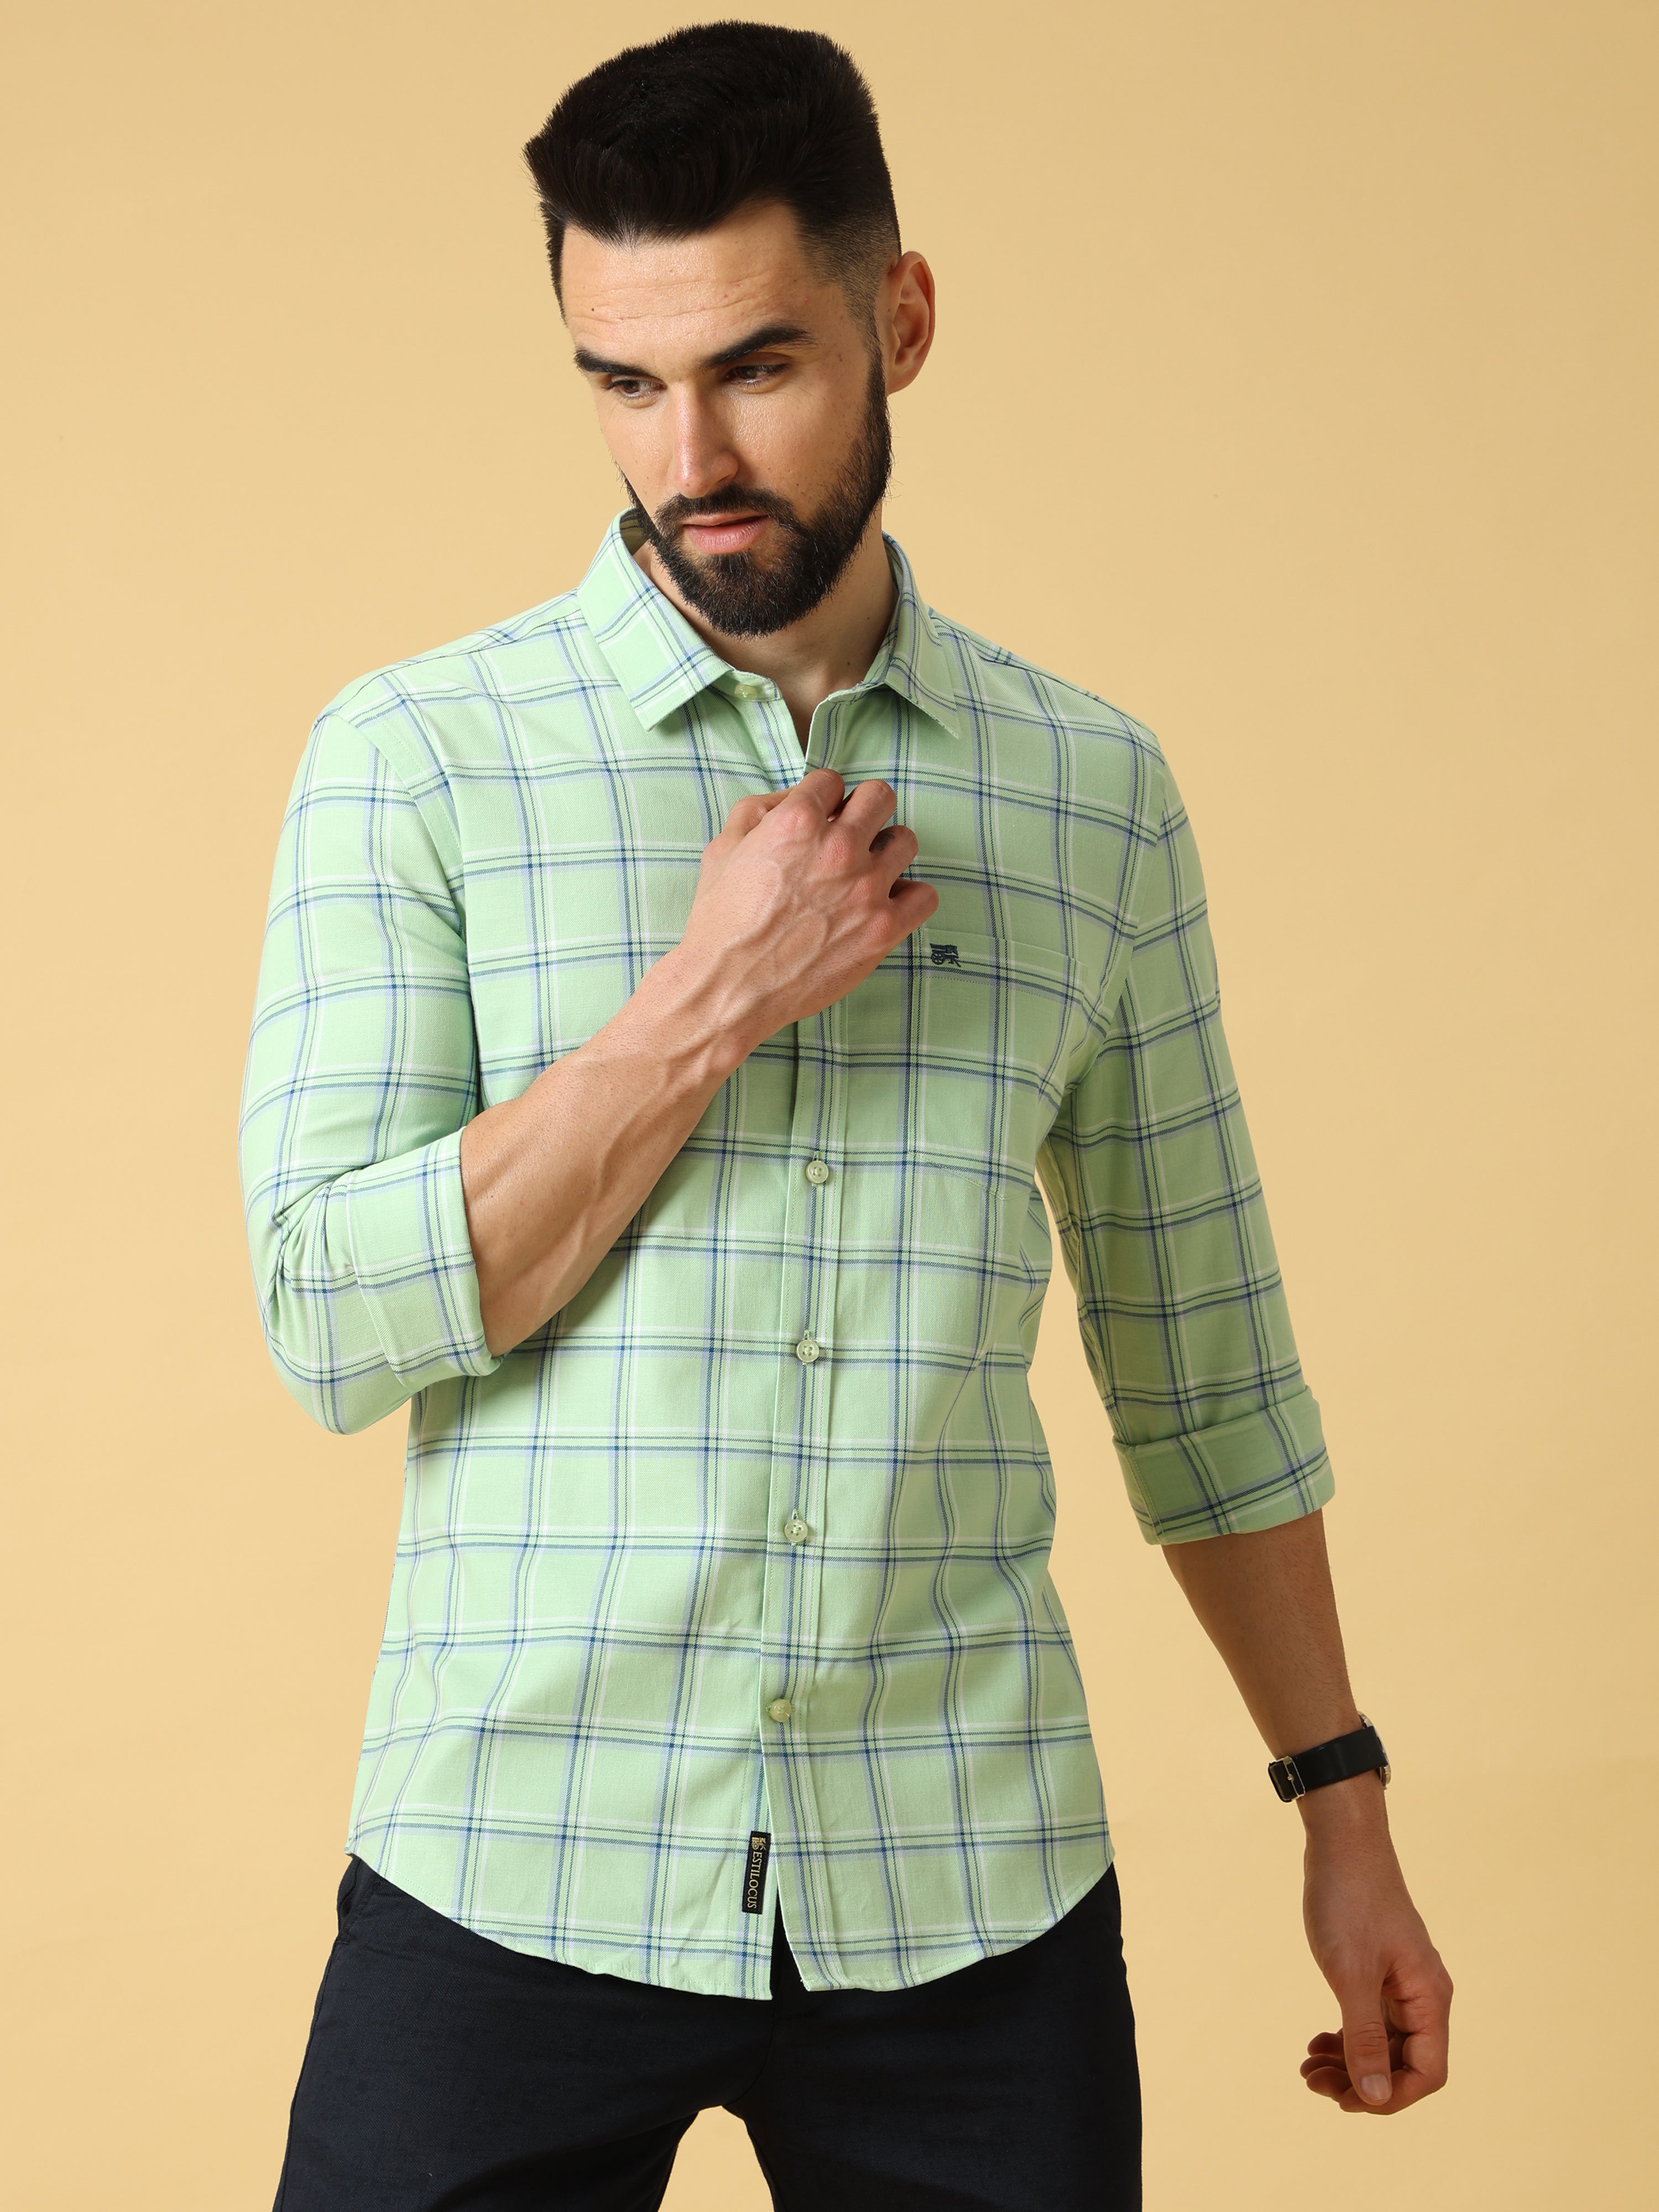 Green Navy /Grey Check Shirt shop online at Estilocus. 100% PREMIUM COTTON FULL SLEEVE CHECKED SLIM SHIRT CUTAWAY COLLAR MACHINE WASH CARE SUITABLE TO WEAR WITH ALL TYPE OF BOTTOMS